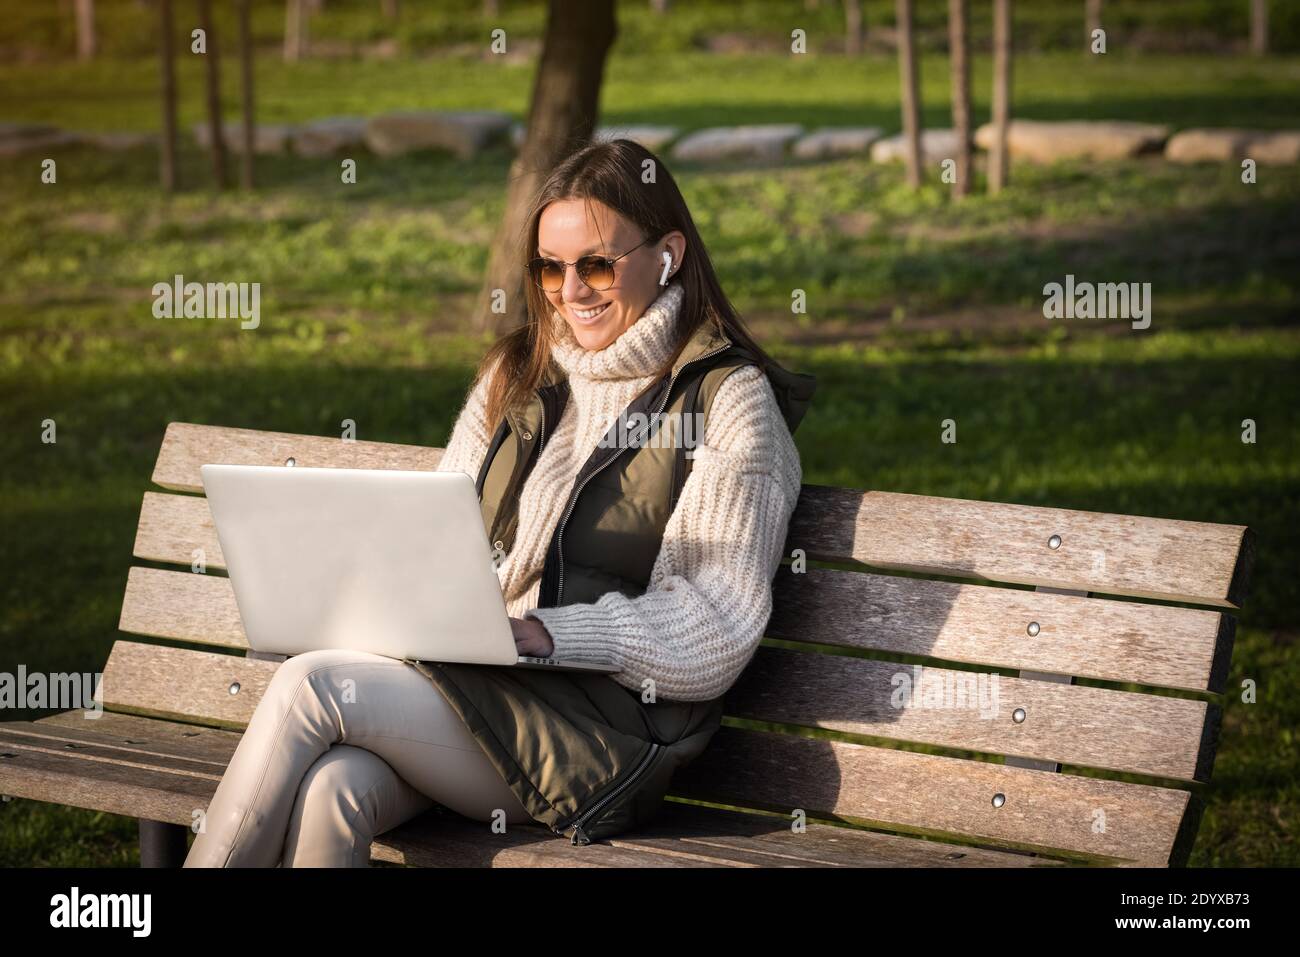 Happy woman working with laptop and headphones outdoor in city park. Student studying outdoors. Freelance working Stock Photo